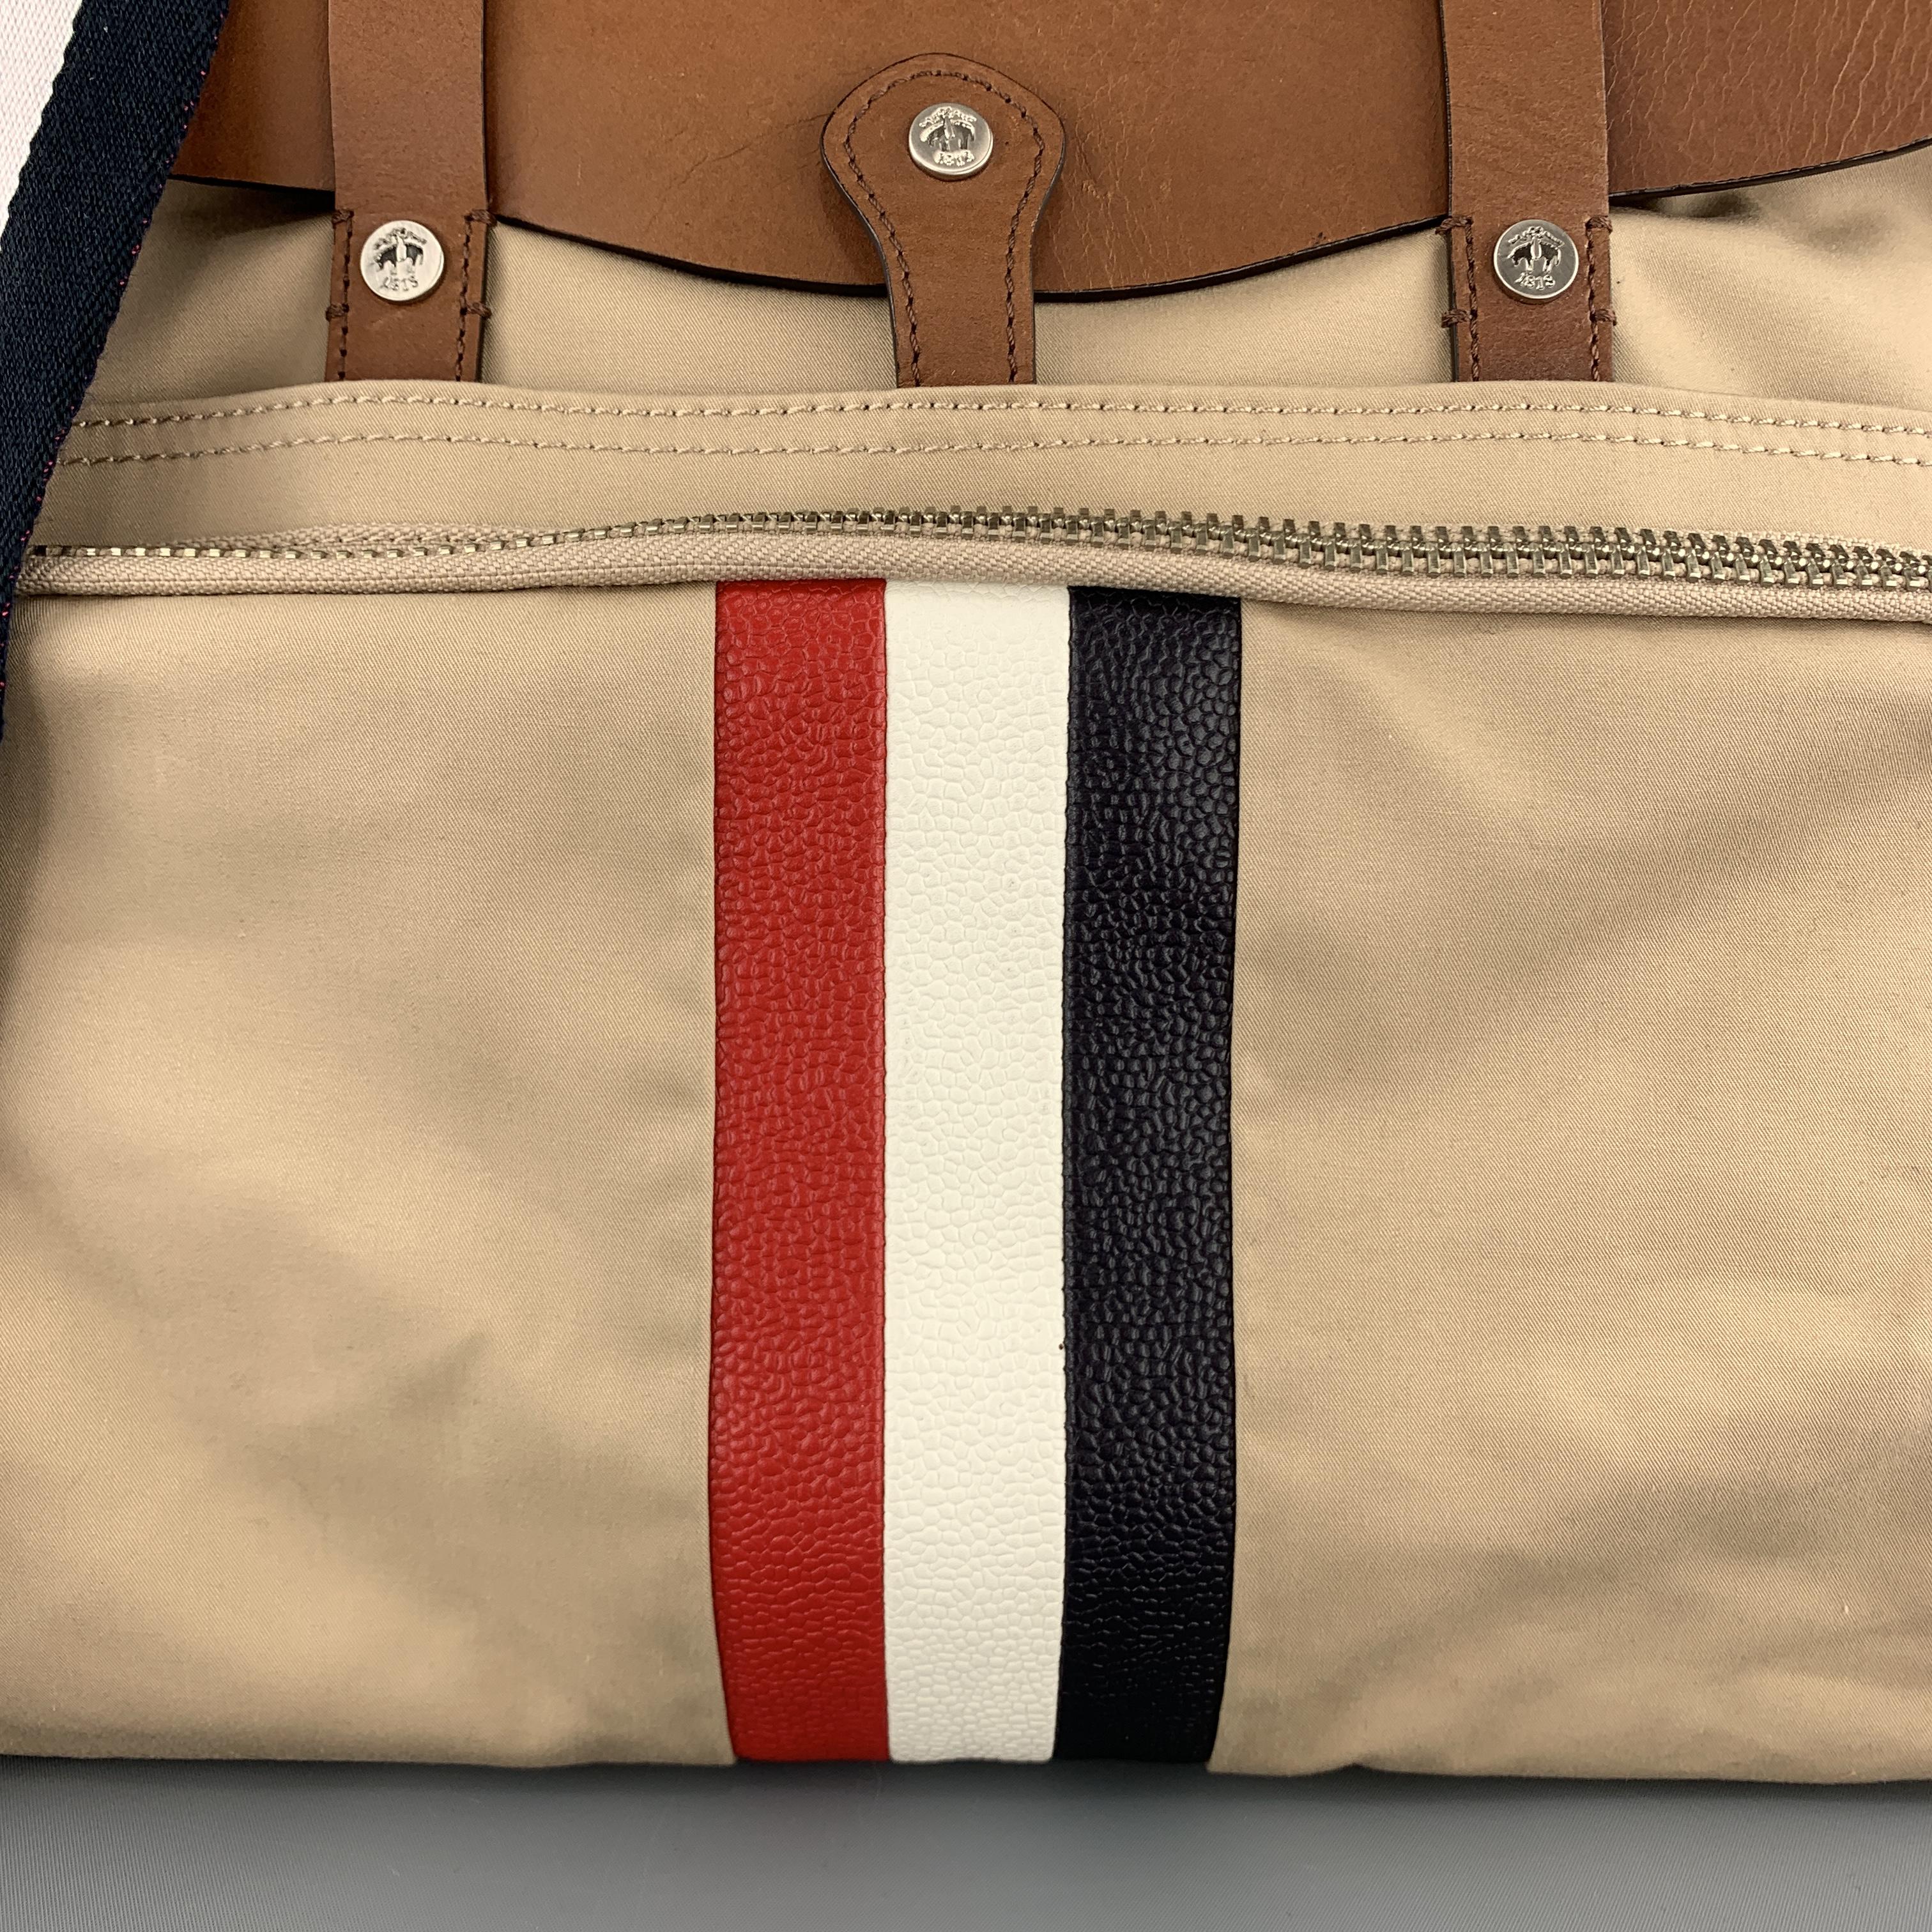 BLACK FLEECE by THOM BROWNE men's satchel bag comes in  khaki canvas with with a frontal zip pocket, tan leather flap top with double straps, top zip closure, back pocket, detachable webbing crossbody strap, and red, white, and navy blue pebbled